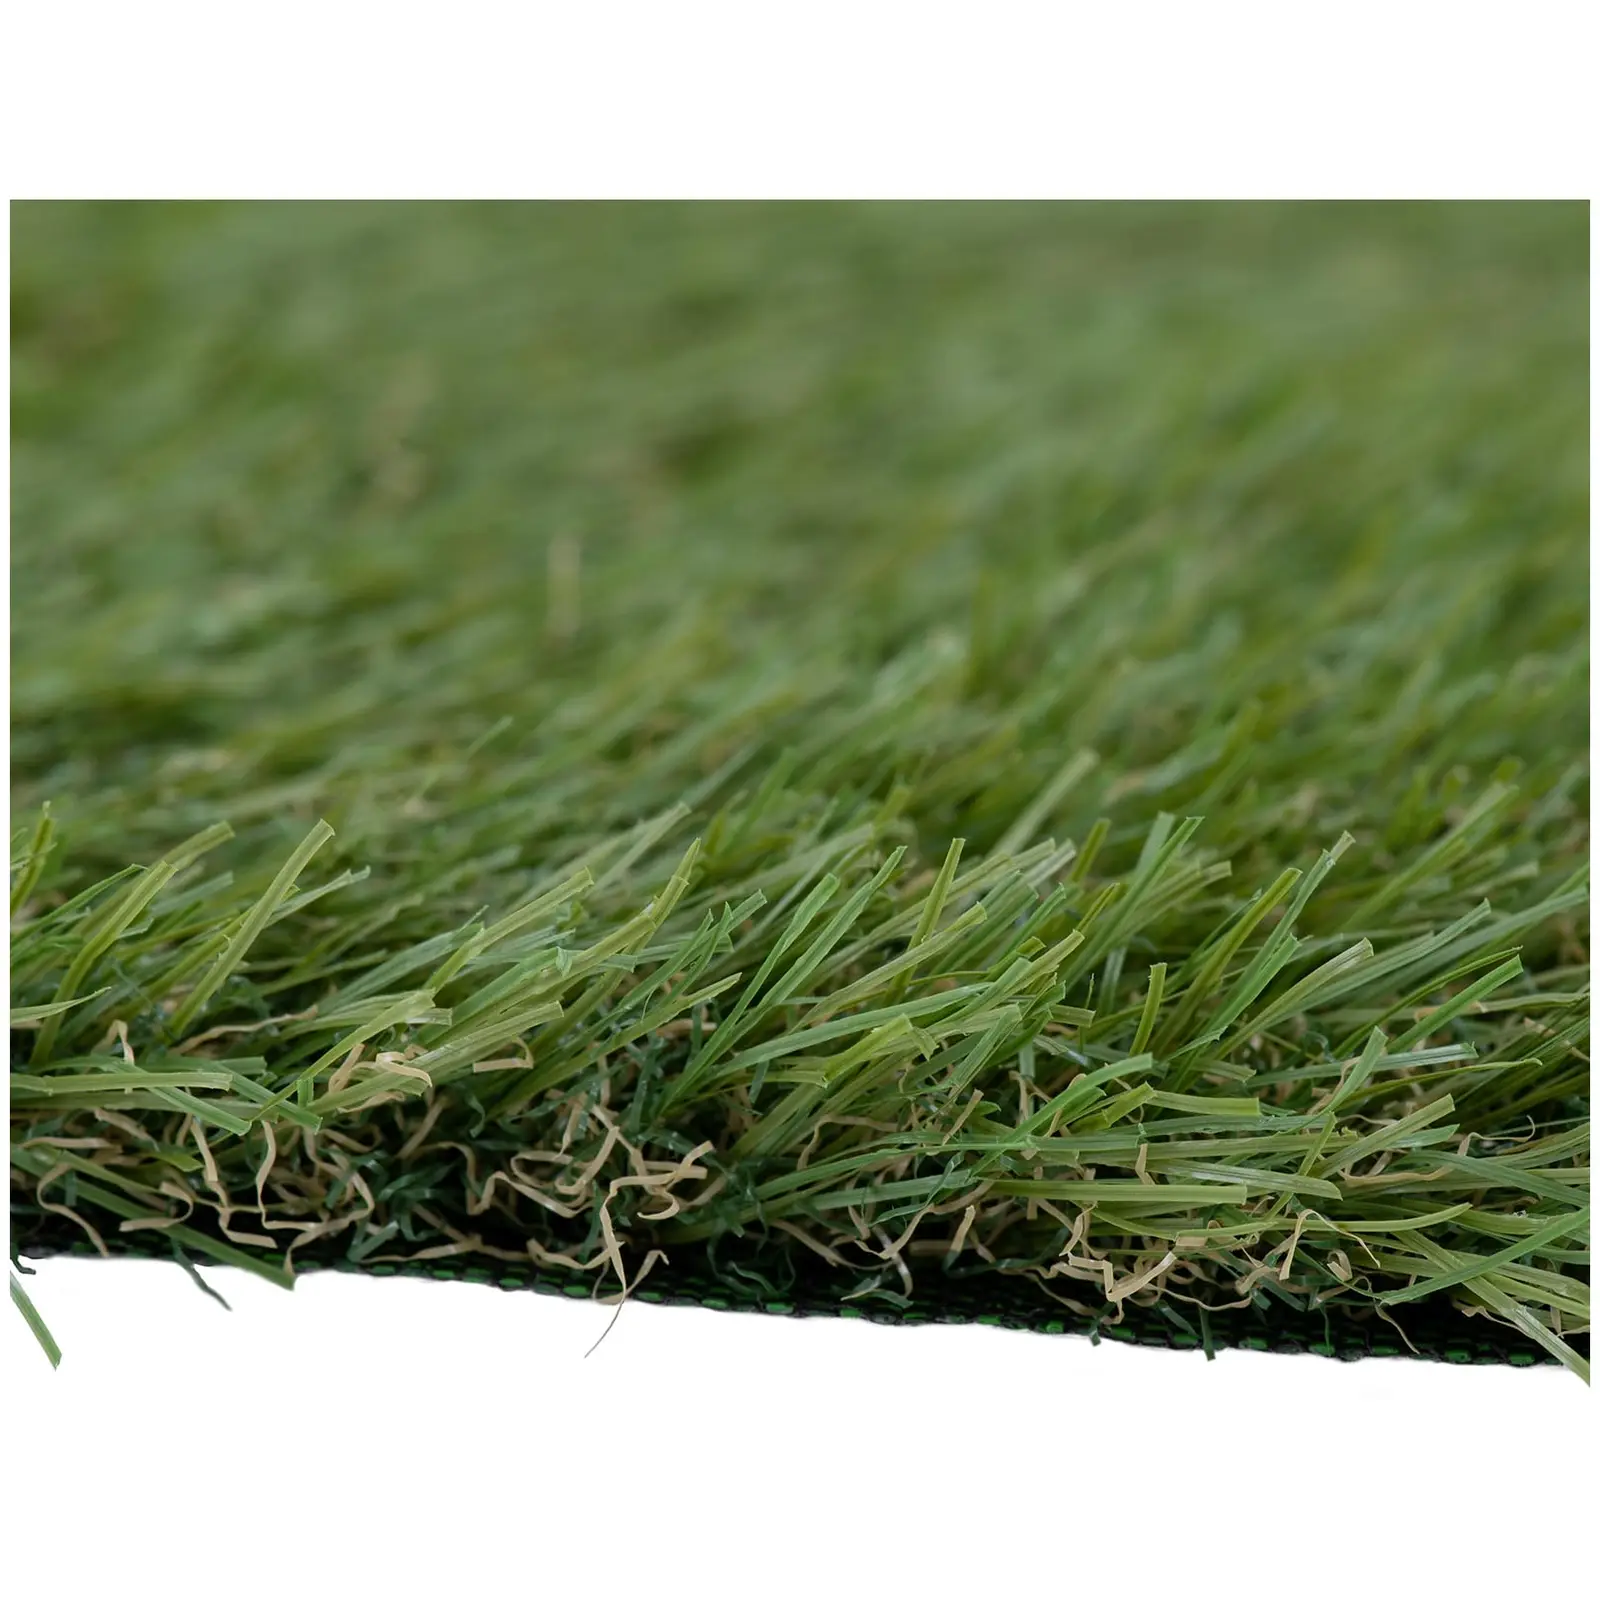 Artificial grass - 100 x 1000 cm - Height: 30 mm - Stitch rate: 14/10 cm - UV-resistant